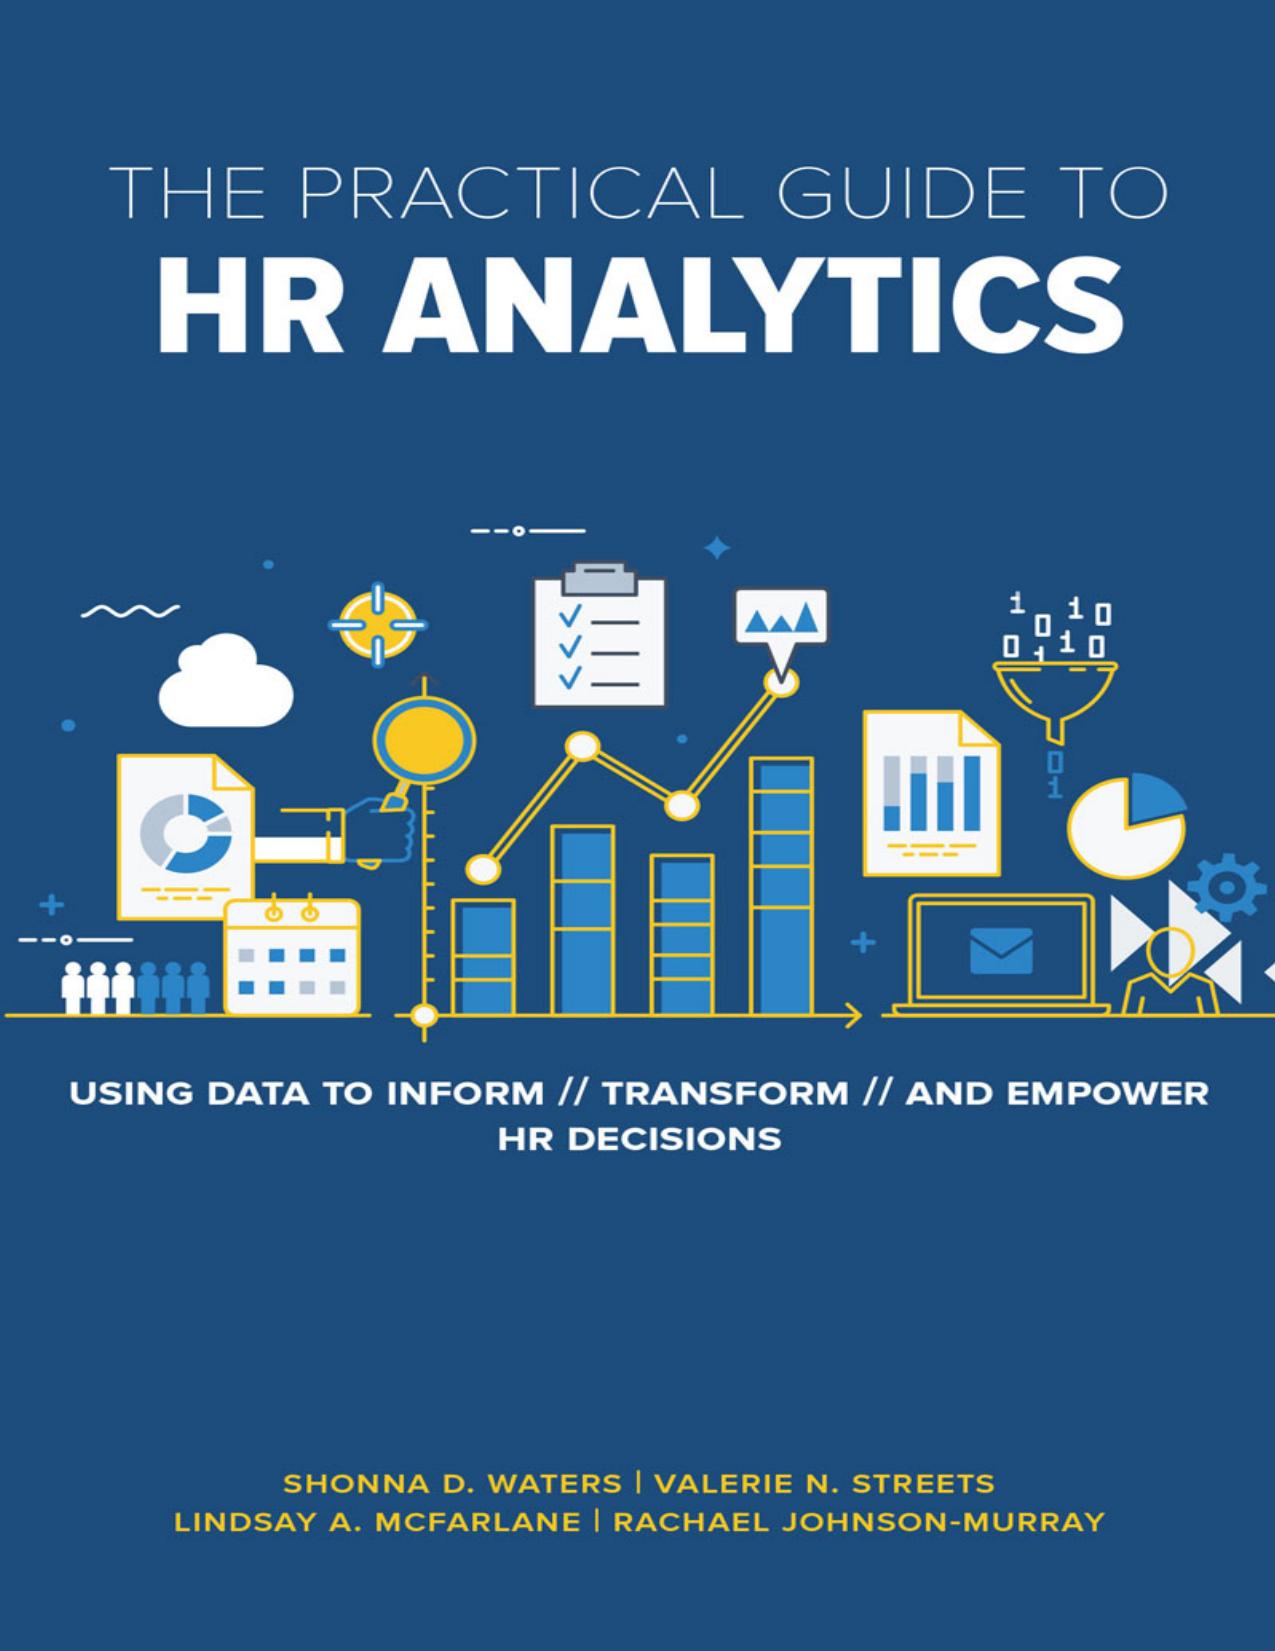 Practical Guide to HR Analyticss: Using Data to Inform, Transform, and Empower HR Decisions by Rachael Johnson-Murray, Lindsay McFarlane, Valerie Streets,Shonna Waters